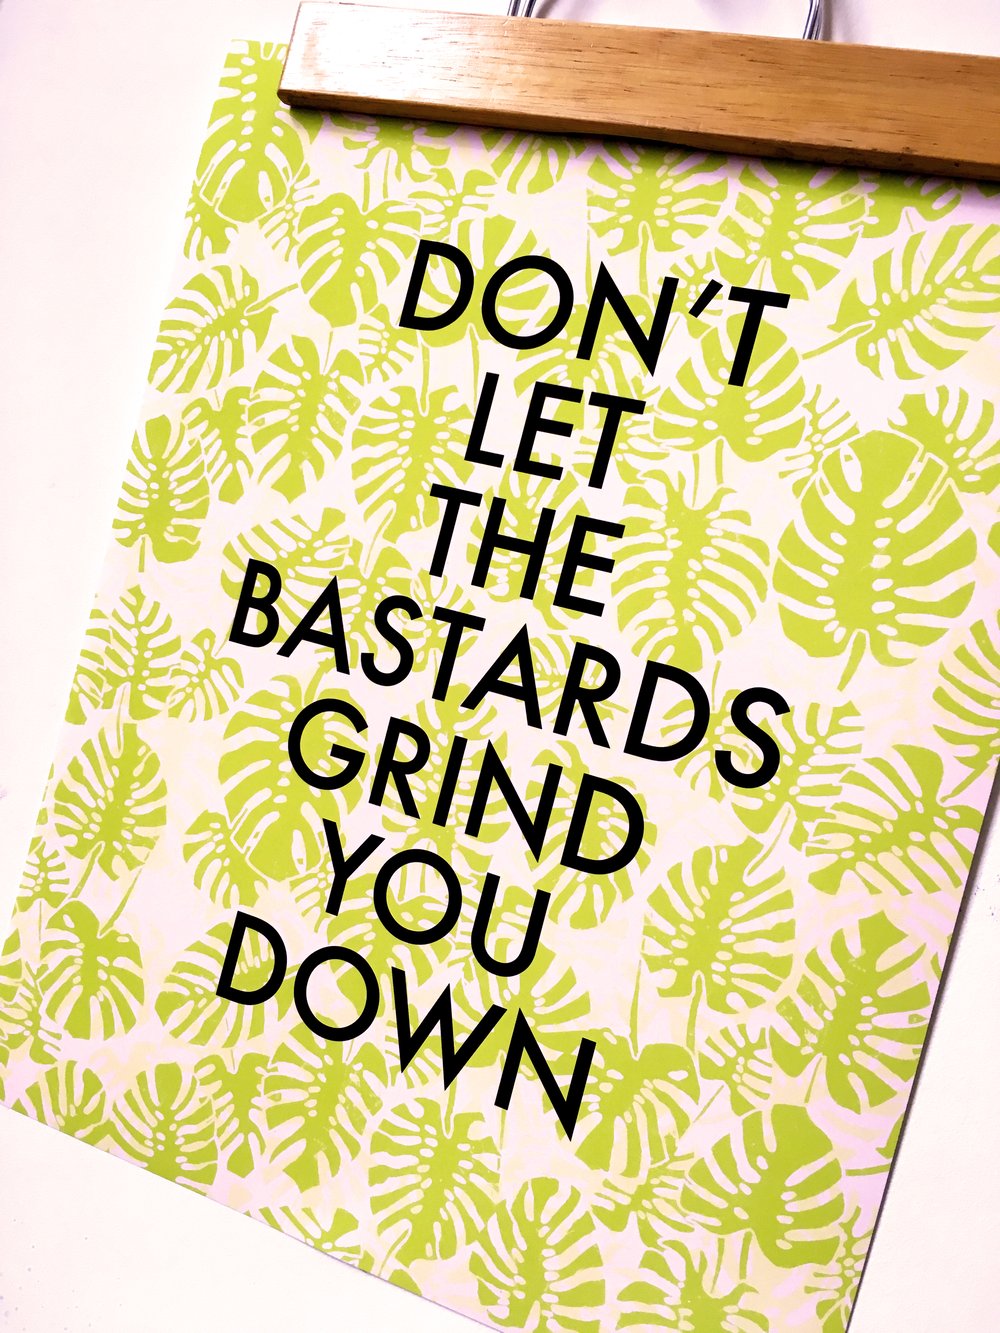 Don't Let the Bastards Grind You Down-11 x 14 print